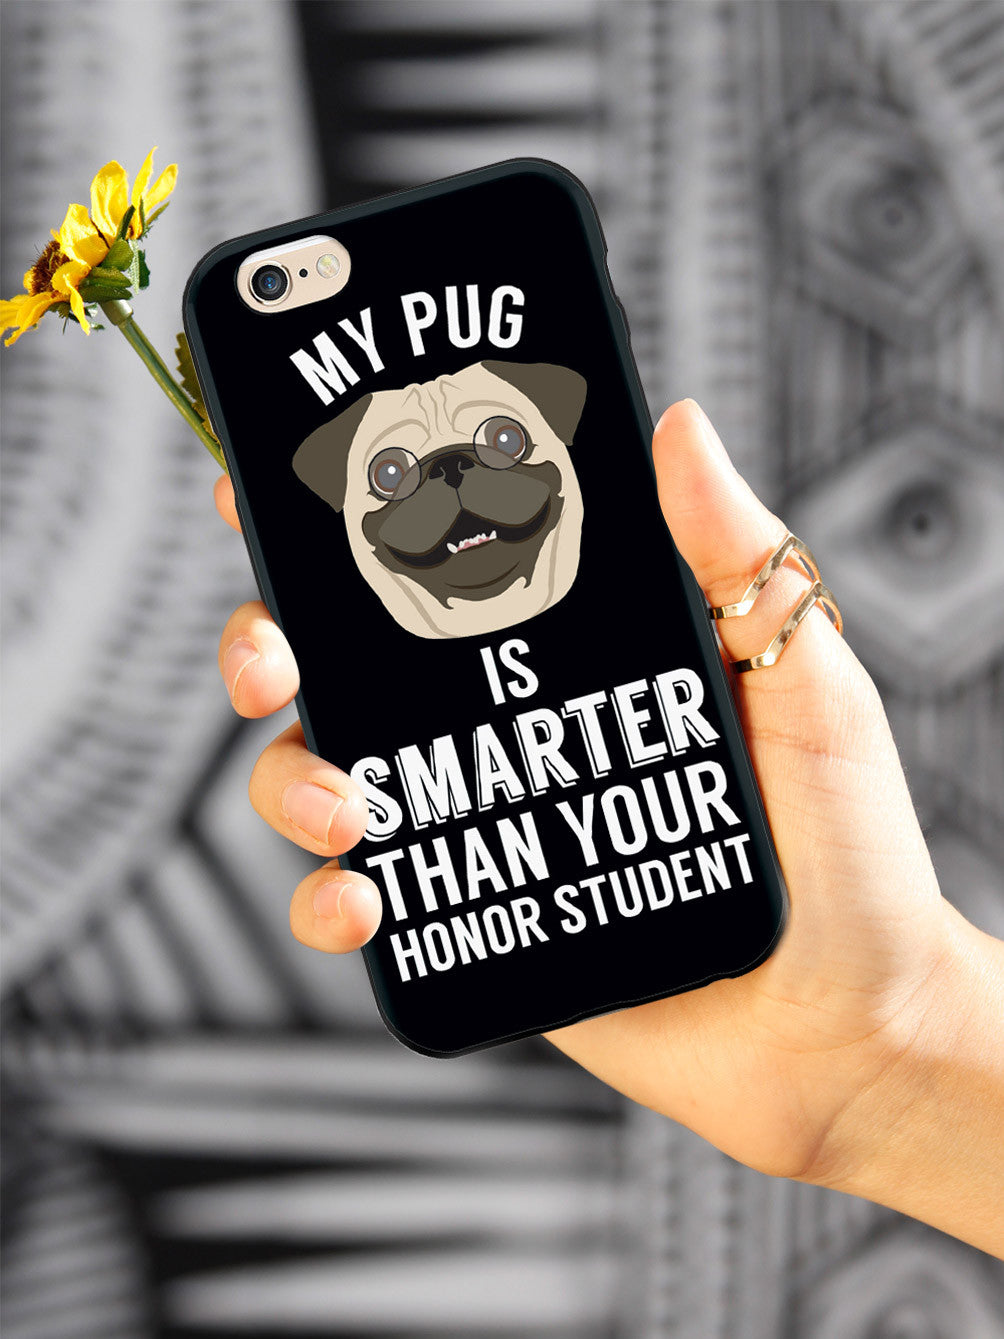 Smarter Than Your Honor Student - Pug Case